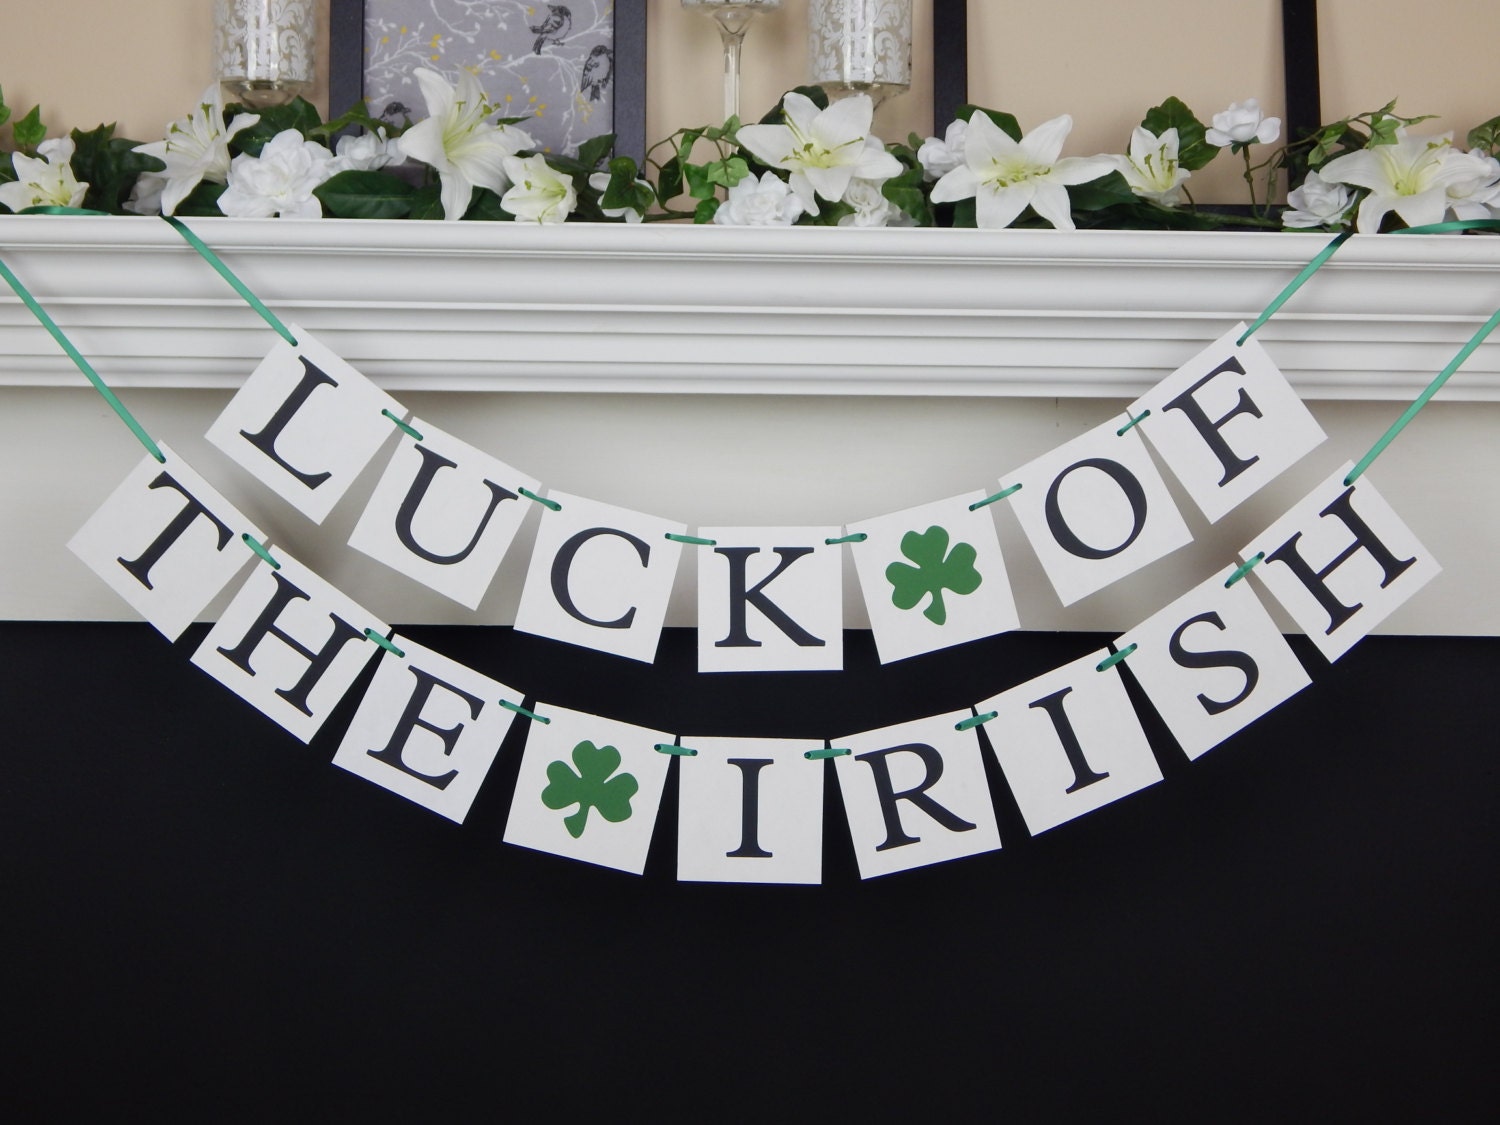 luck of the irish banner - st patrick's day decorations